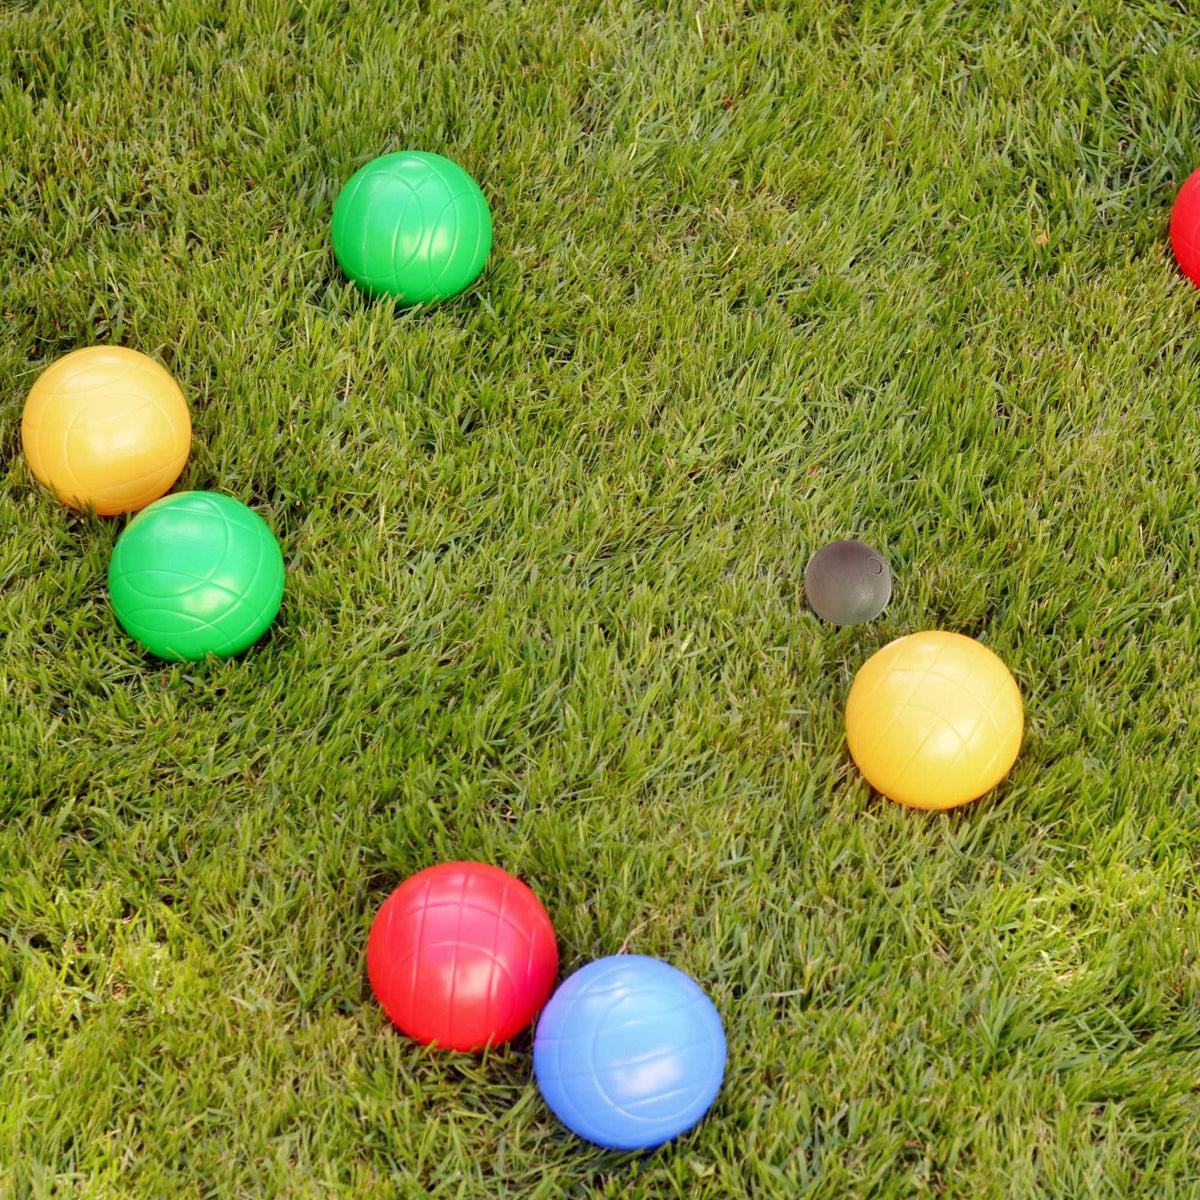 boules garden game, childrens boules game, holiday games, travel games, outdoor toys, backyard games set, traditional garden game, caravanning accessories, camping games